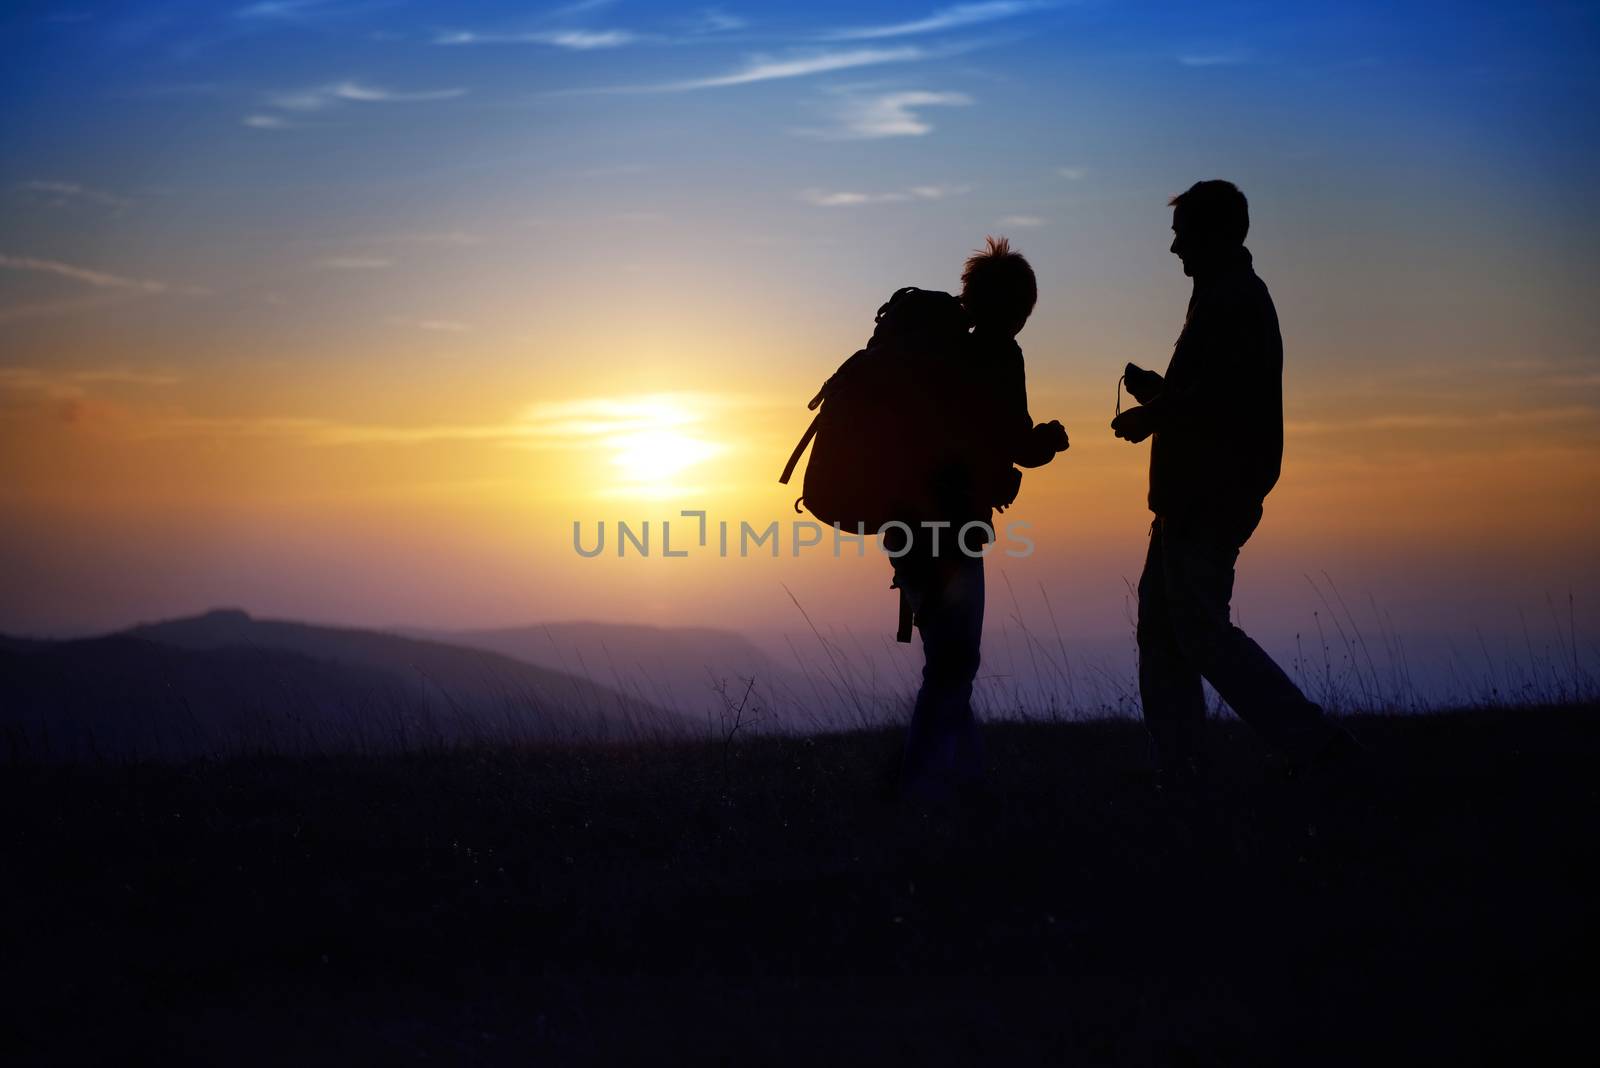 Silhouette of young couple against colorful sunset